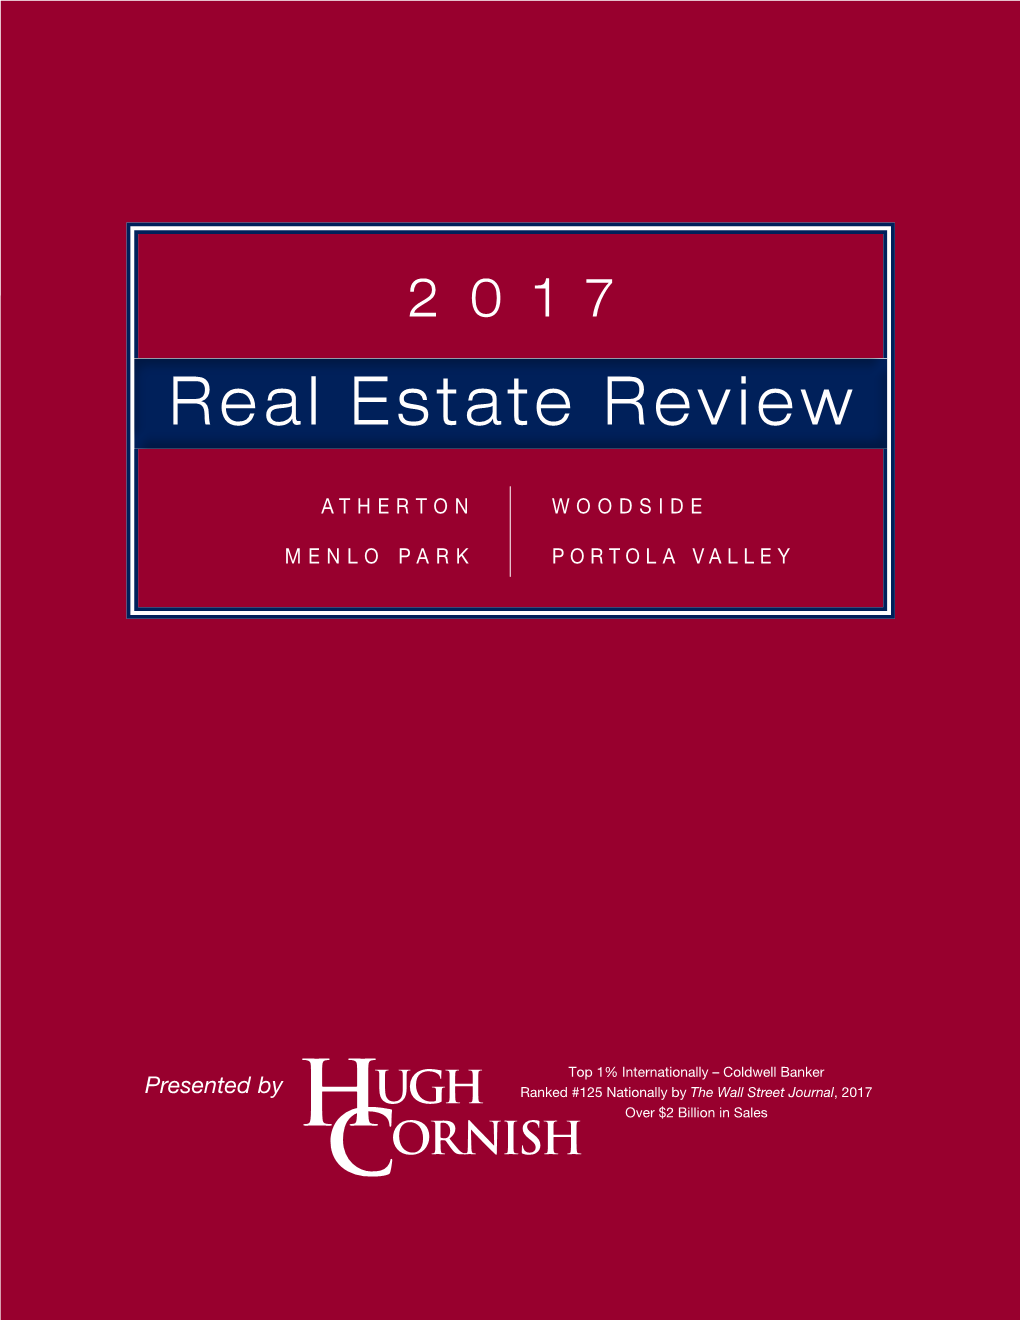 Real Estate Review